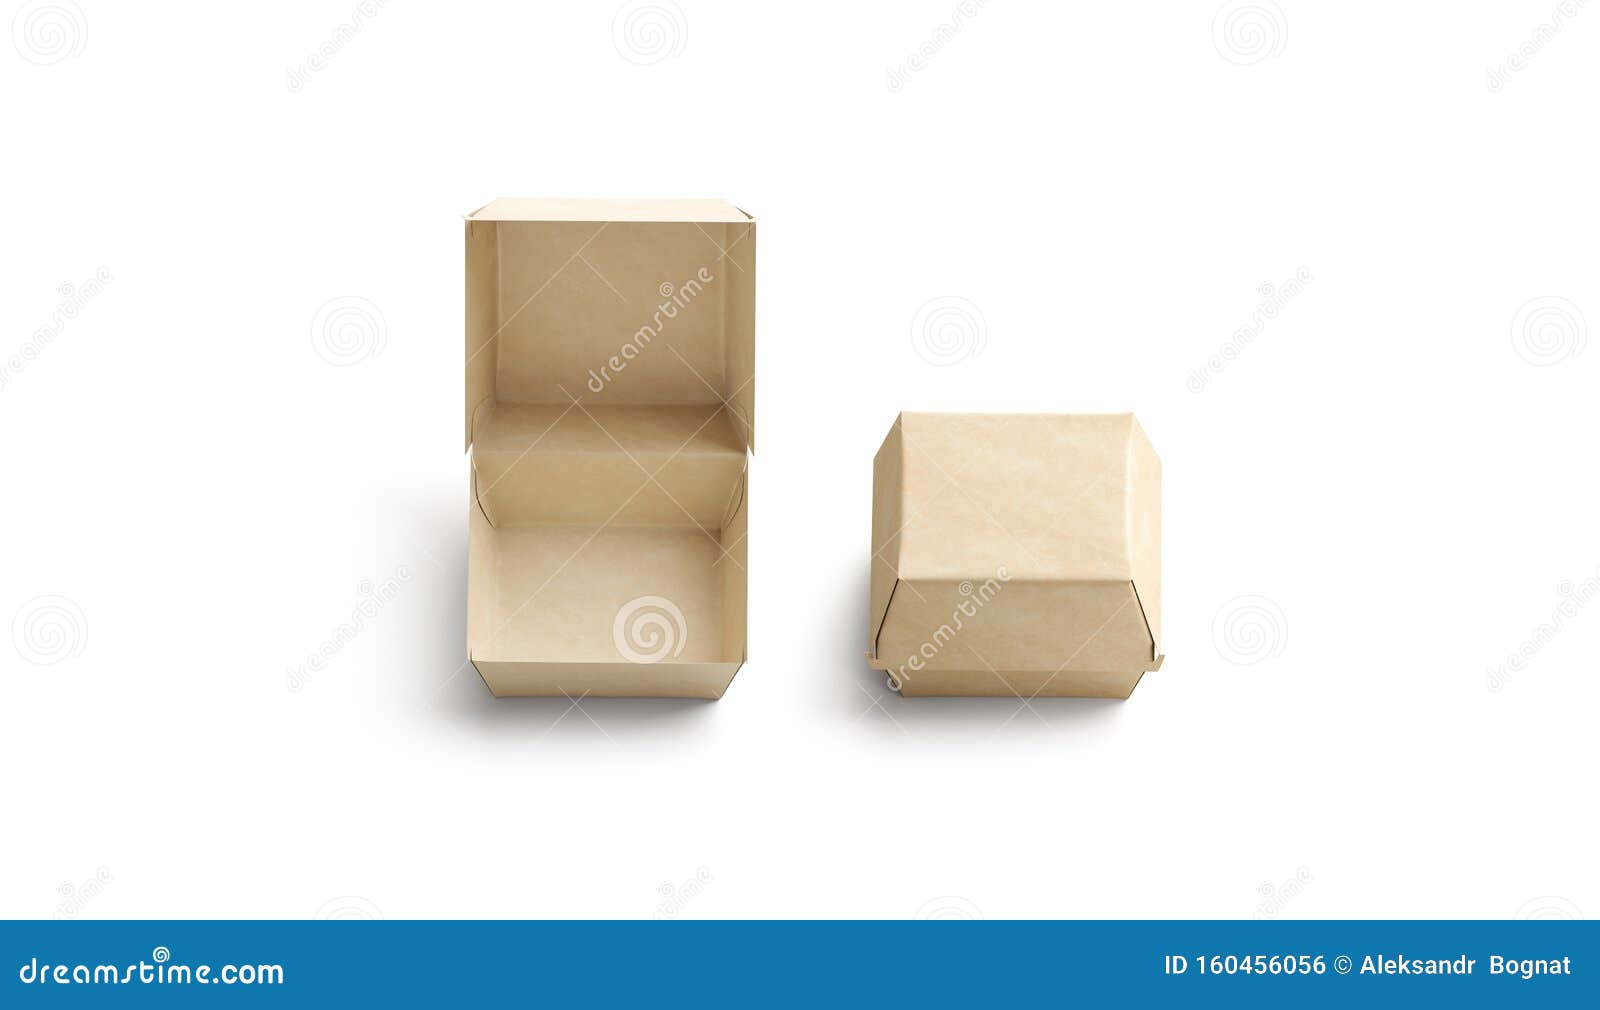 Download Blank Opened And Closed Craft Burger Box Mockup Top View Stock Illustration Illustration Of Opened Craft 160456056